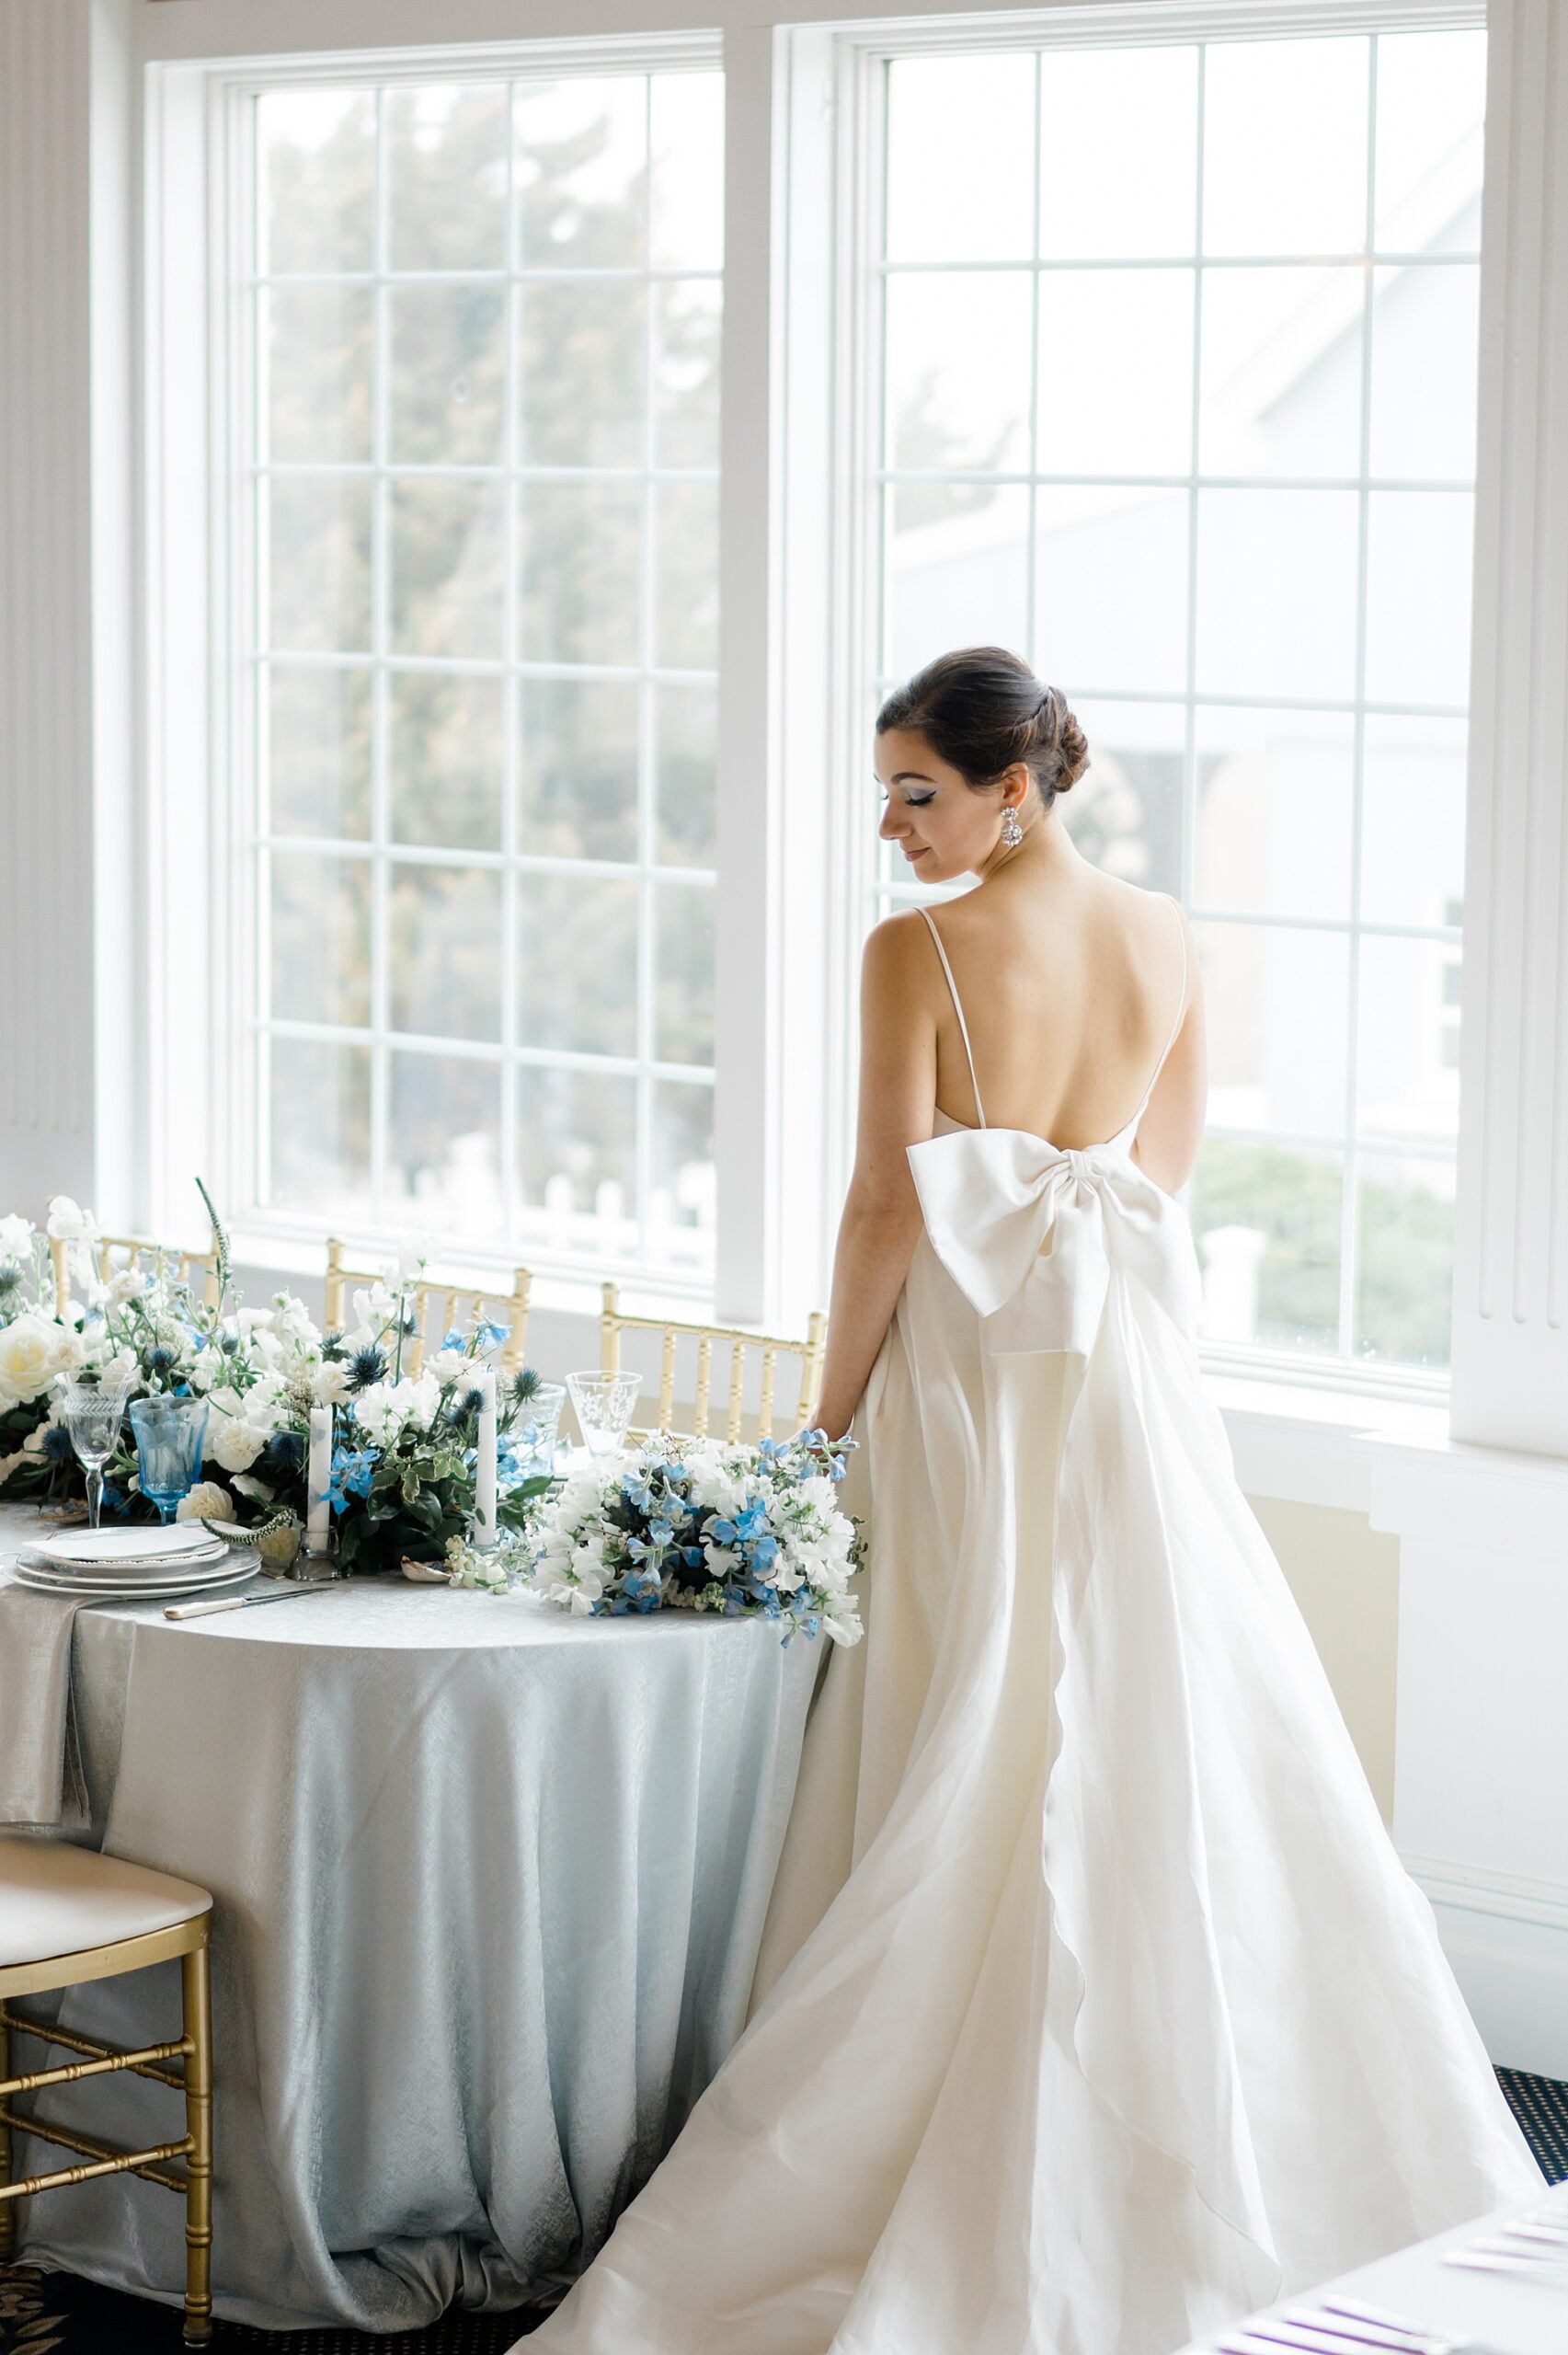 back of bride's wedding dress featuring bow detail